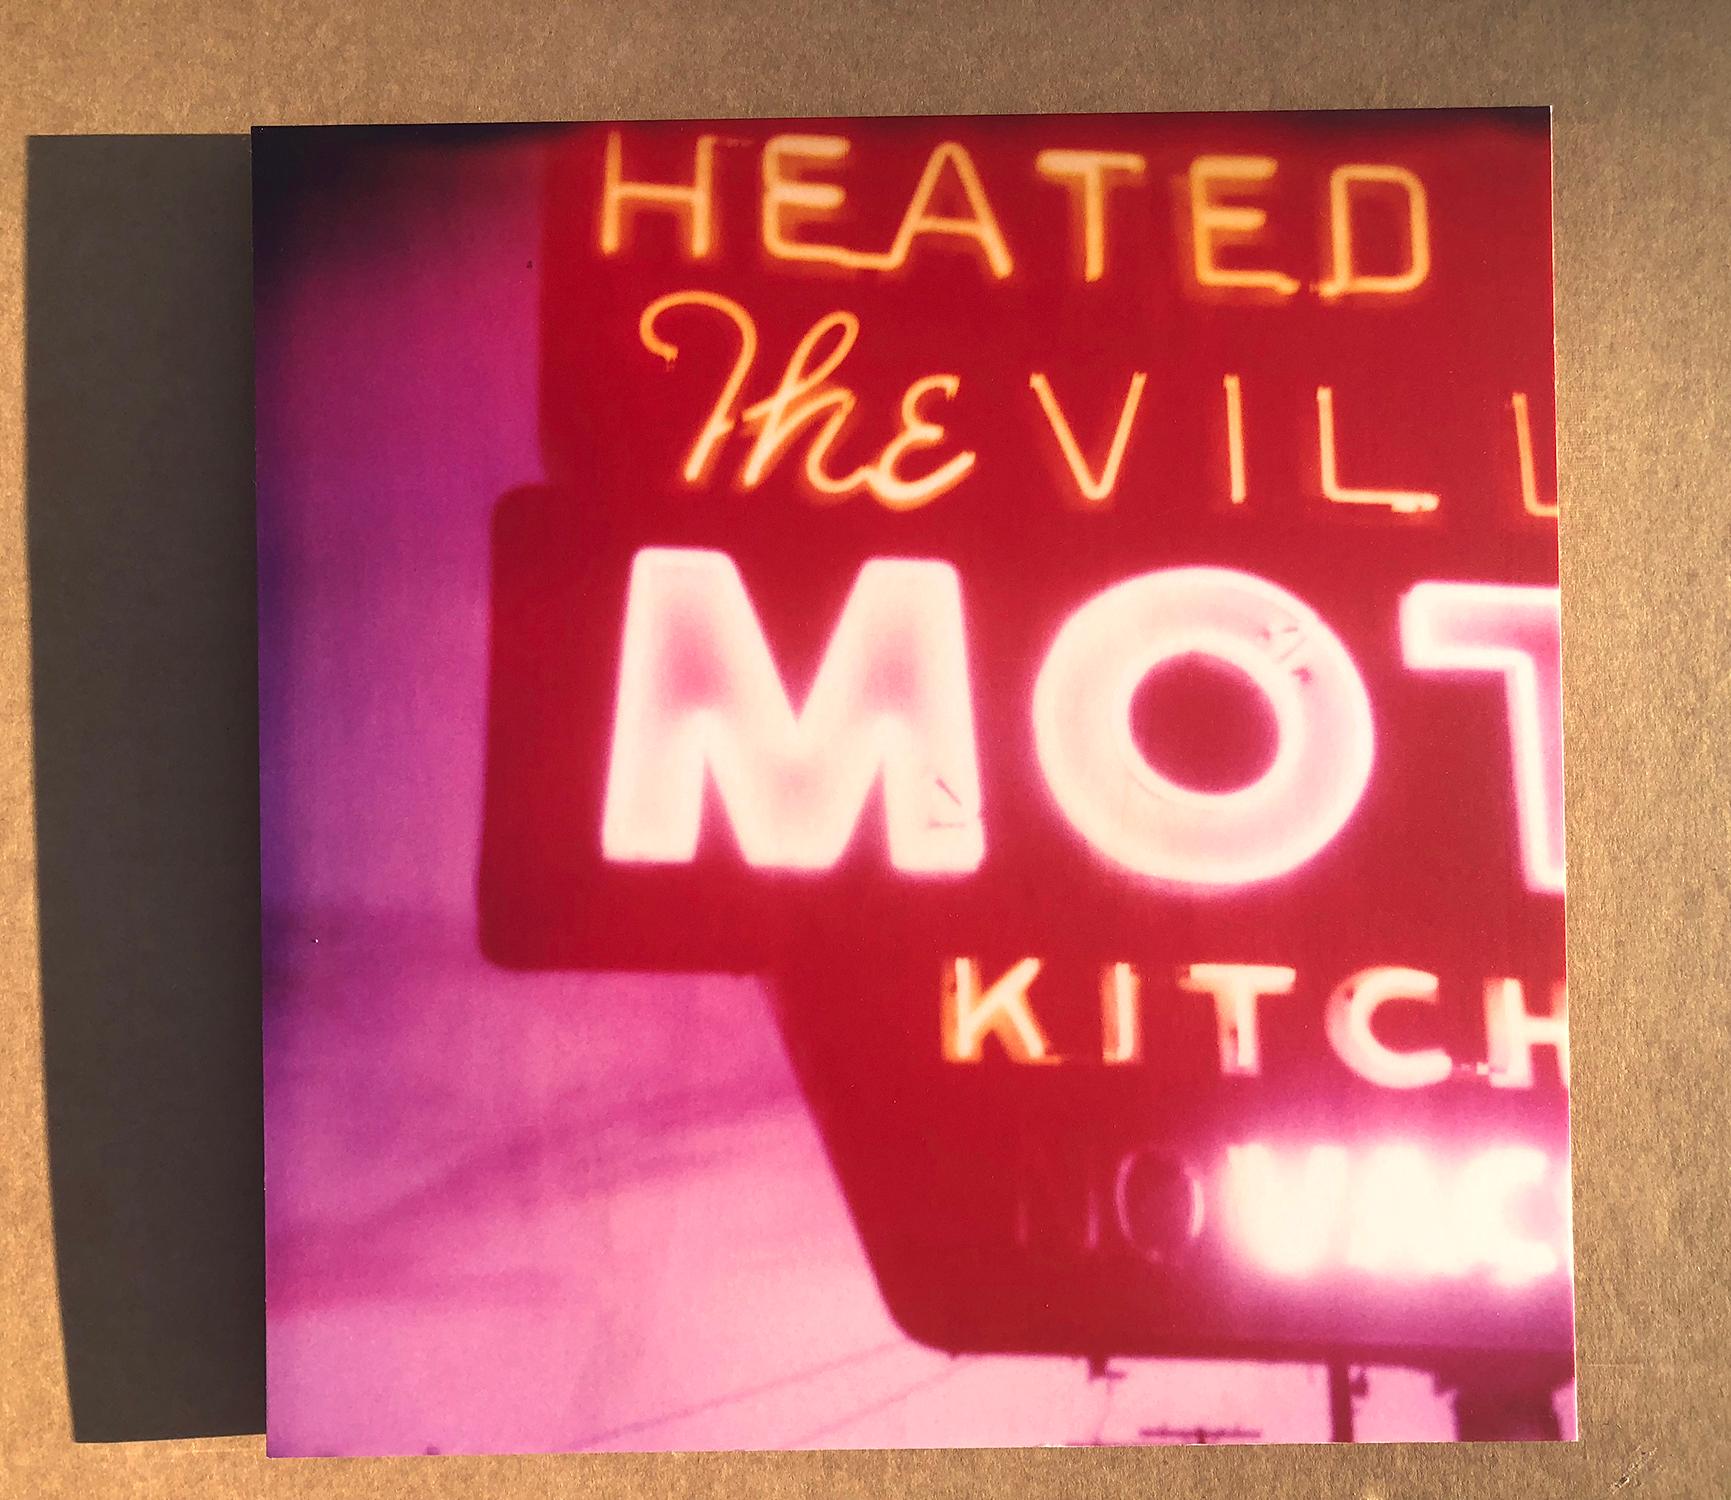 The Village Motel Sunset (The Last Picture Show), analog, mounted - Photograph by Stefanie Schneider